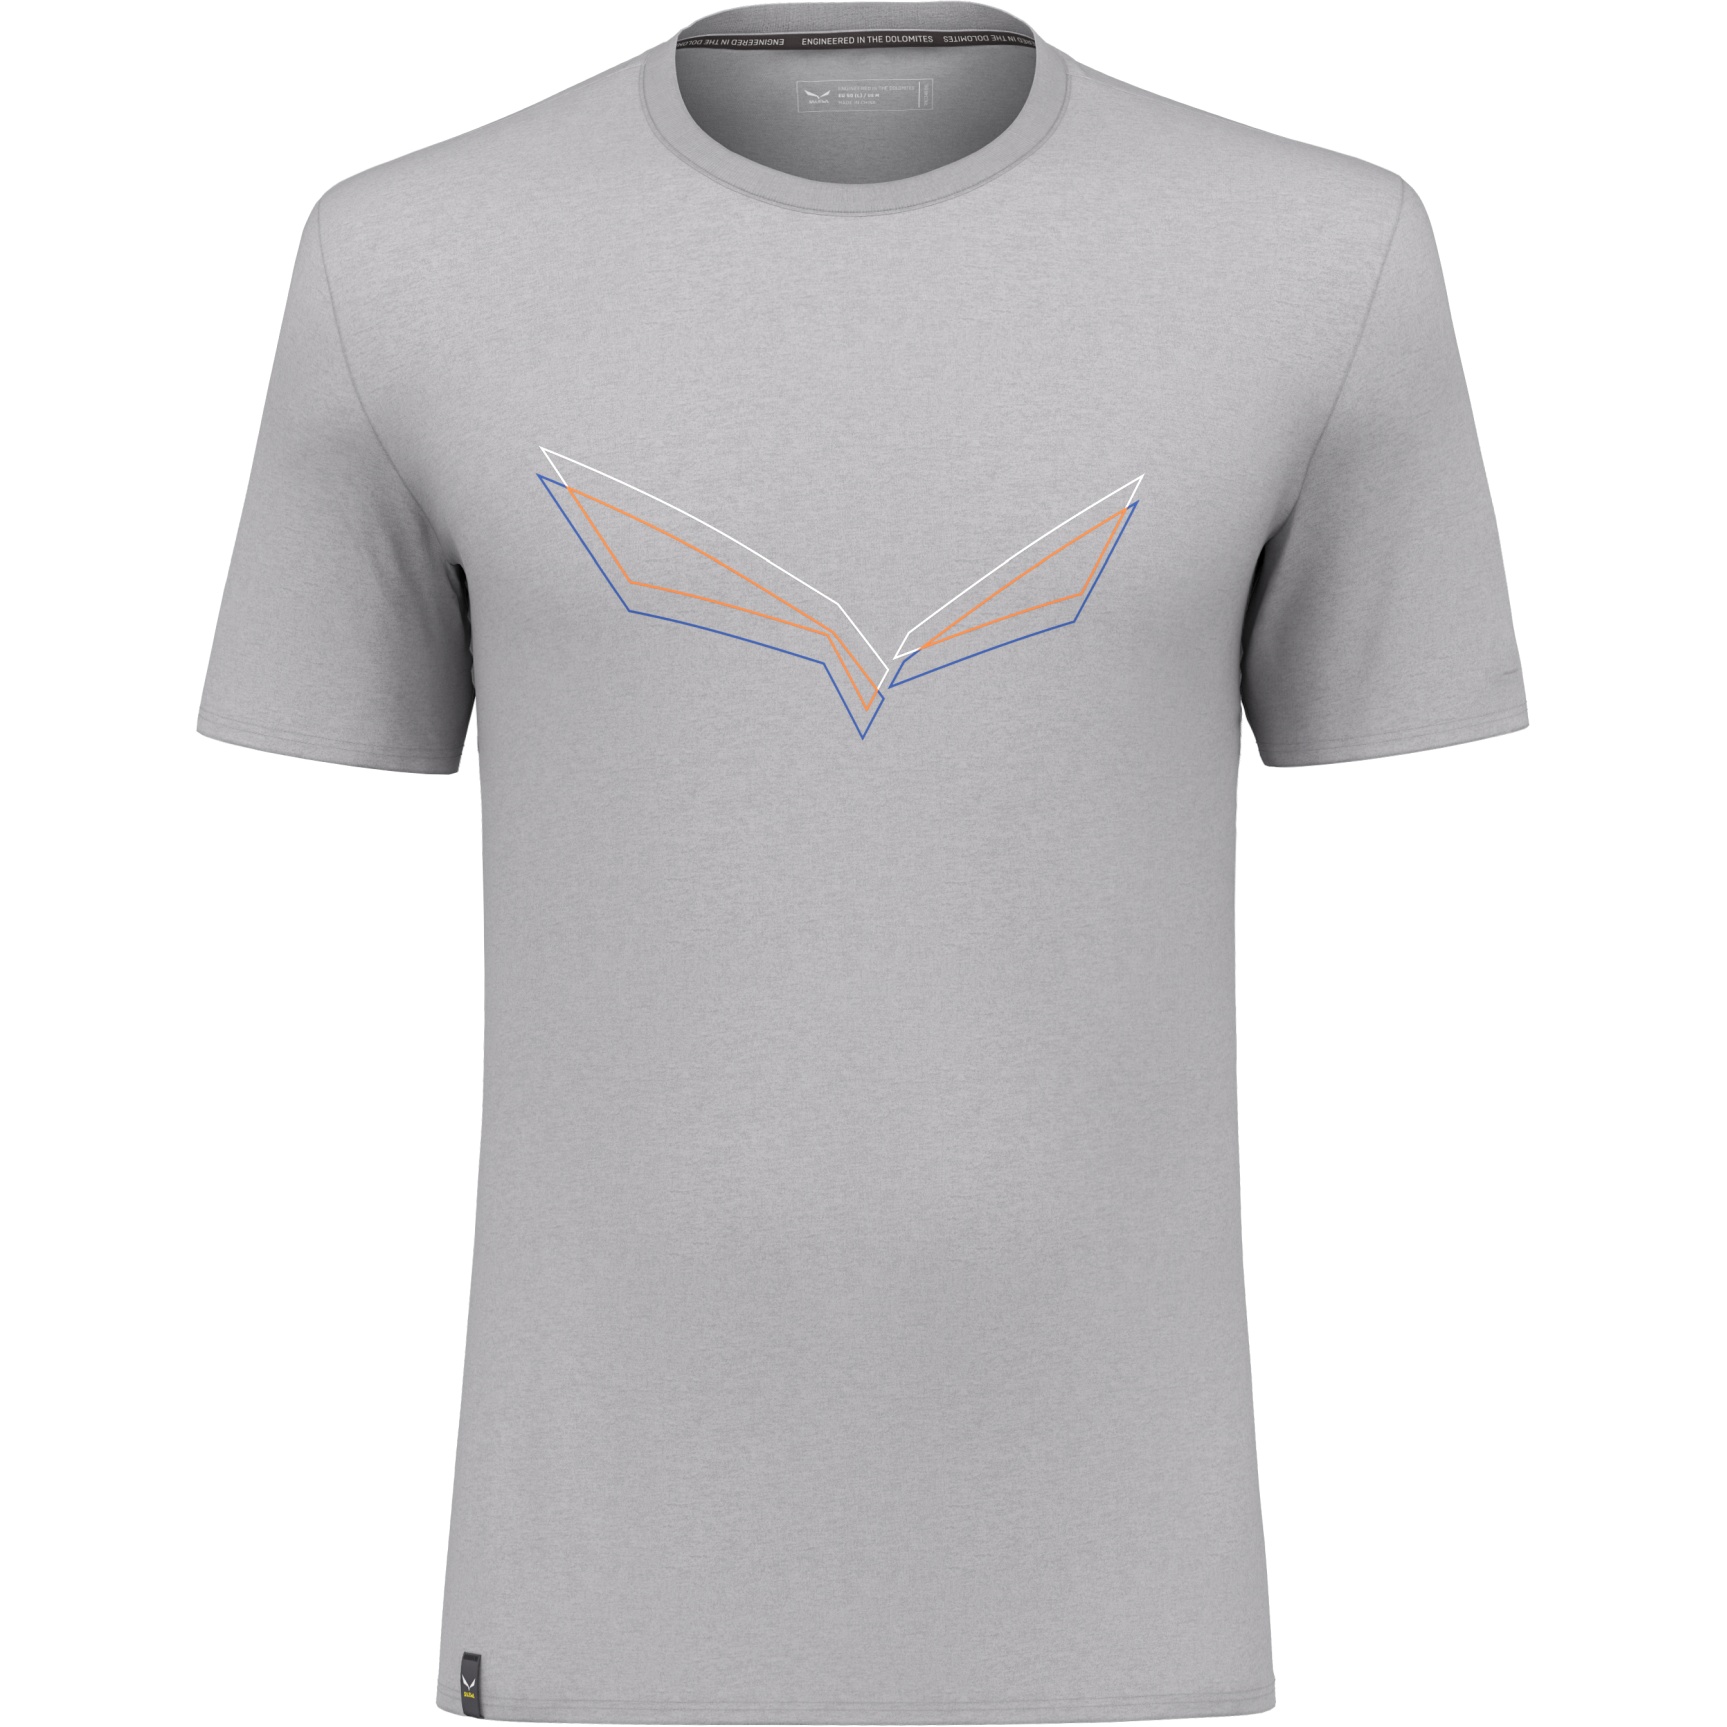 Picture of Salewa Pure Eagle Frame Dry T-Shirt - heather grey melange 624